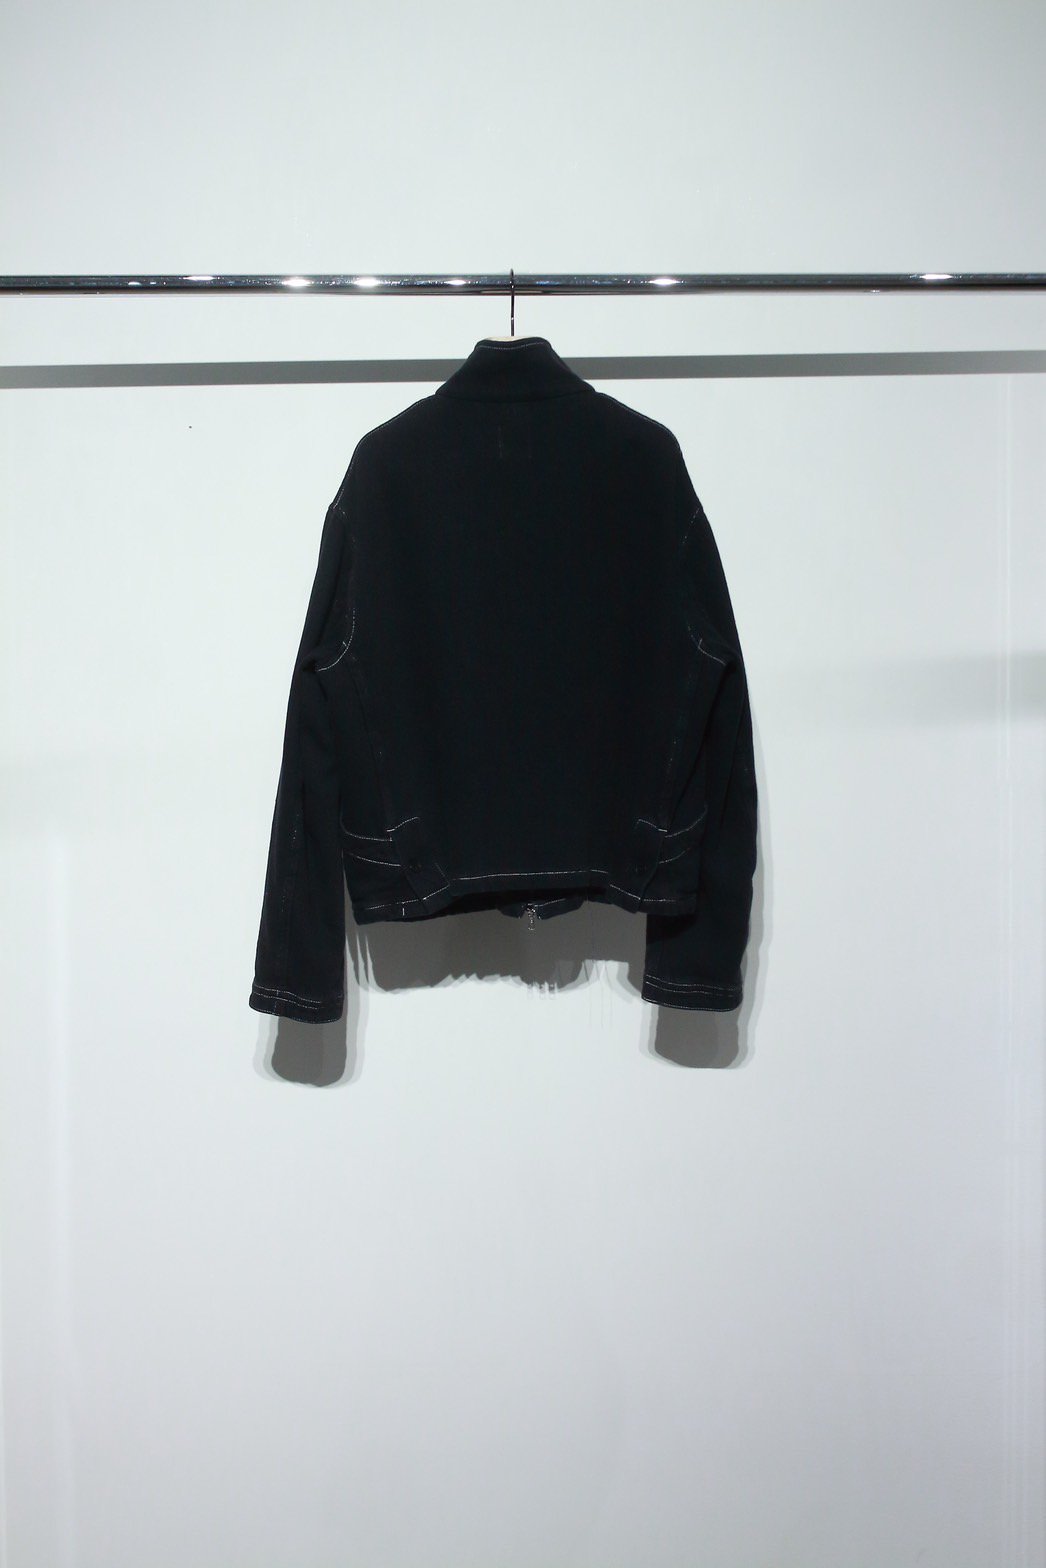 soe<br />Washed Work Jacket / BLACK<img class='new_mark_img2' src='https://img.shop-pro.jp/img/new/icons47.gif' style='border:none;display:inline;margin:0px;padding:0px;width:auto;' />